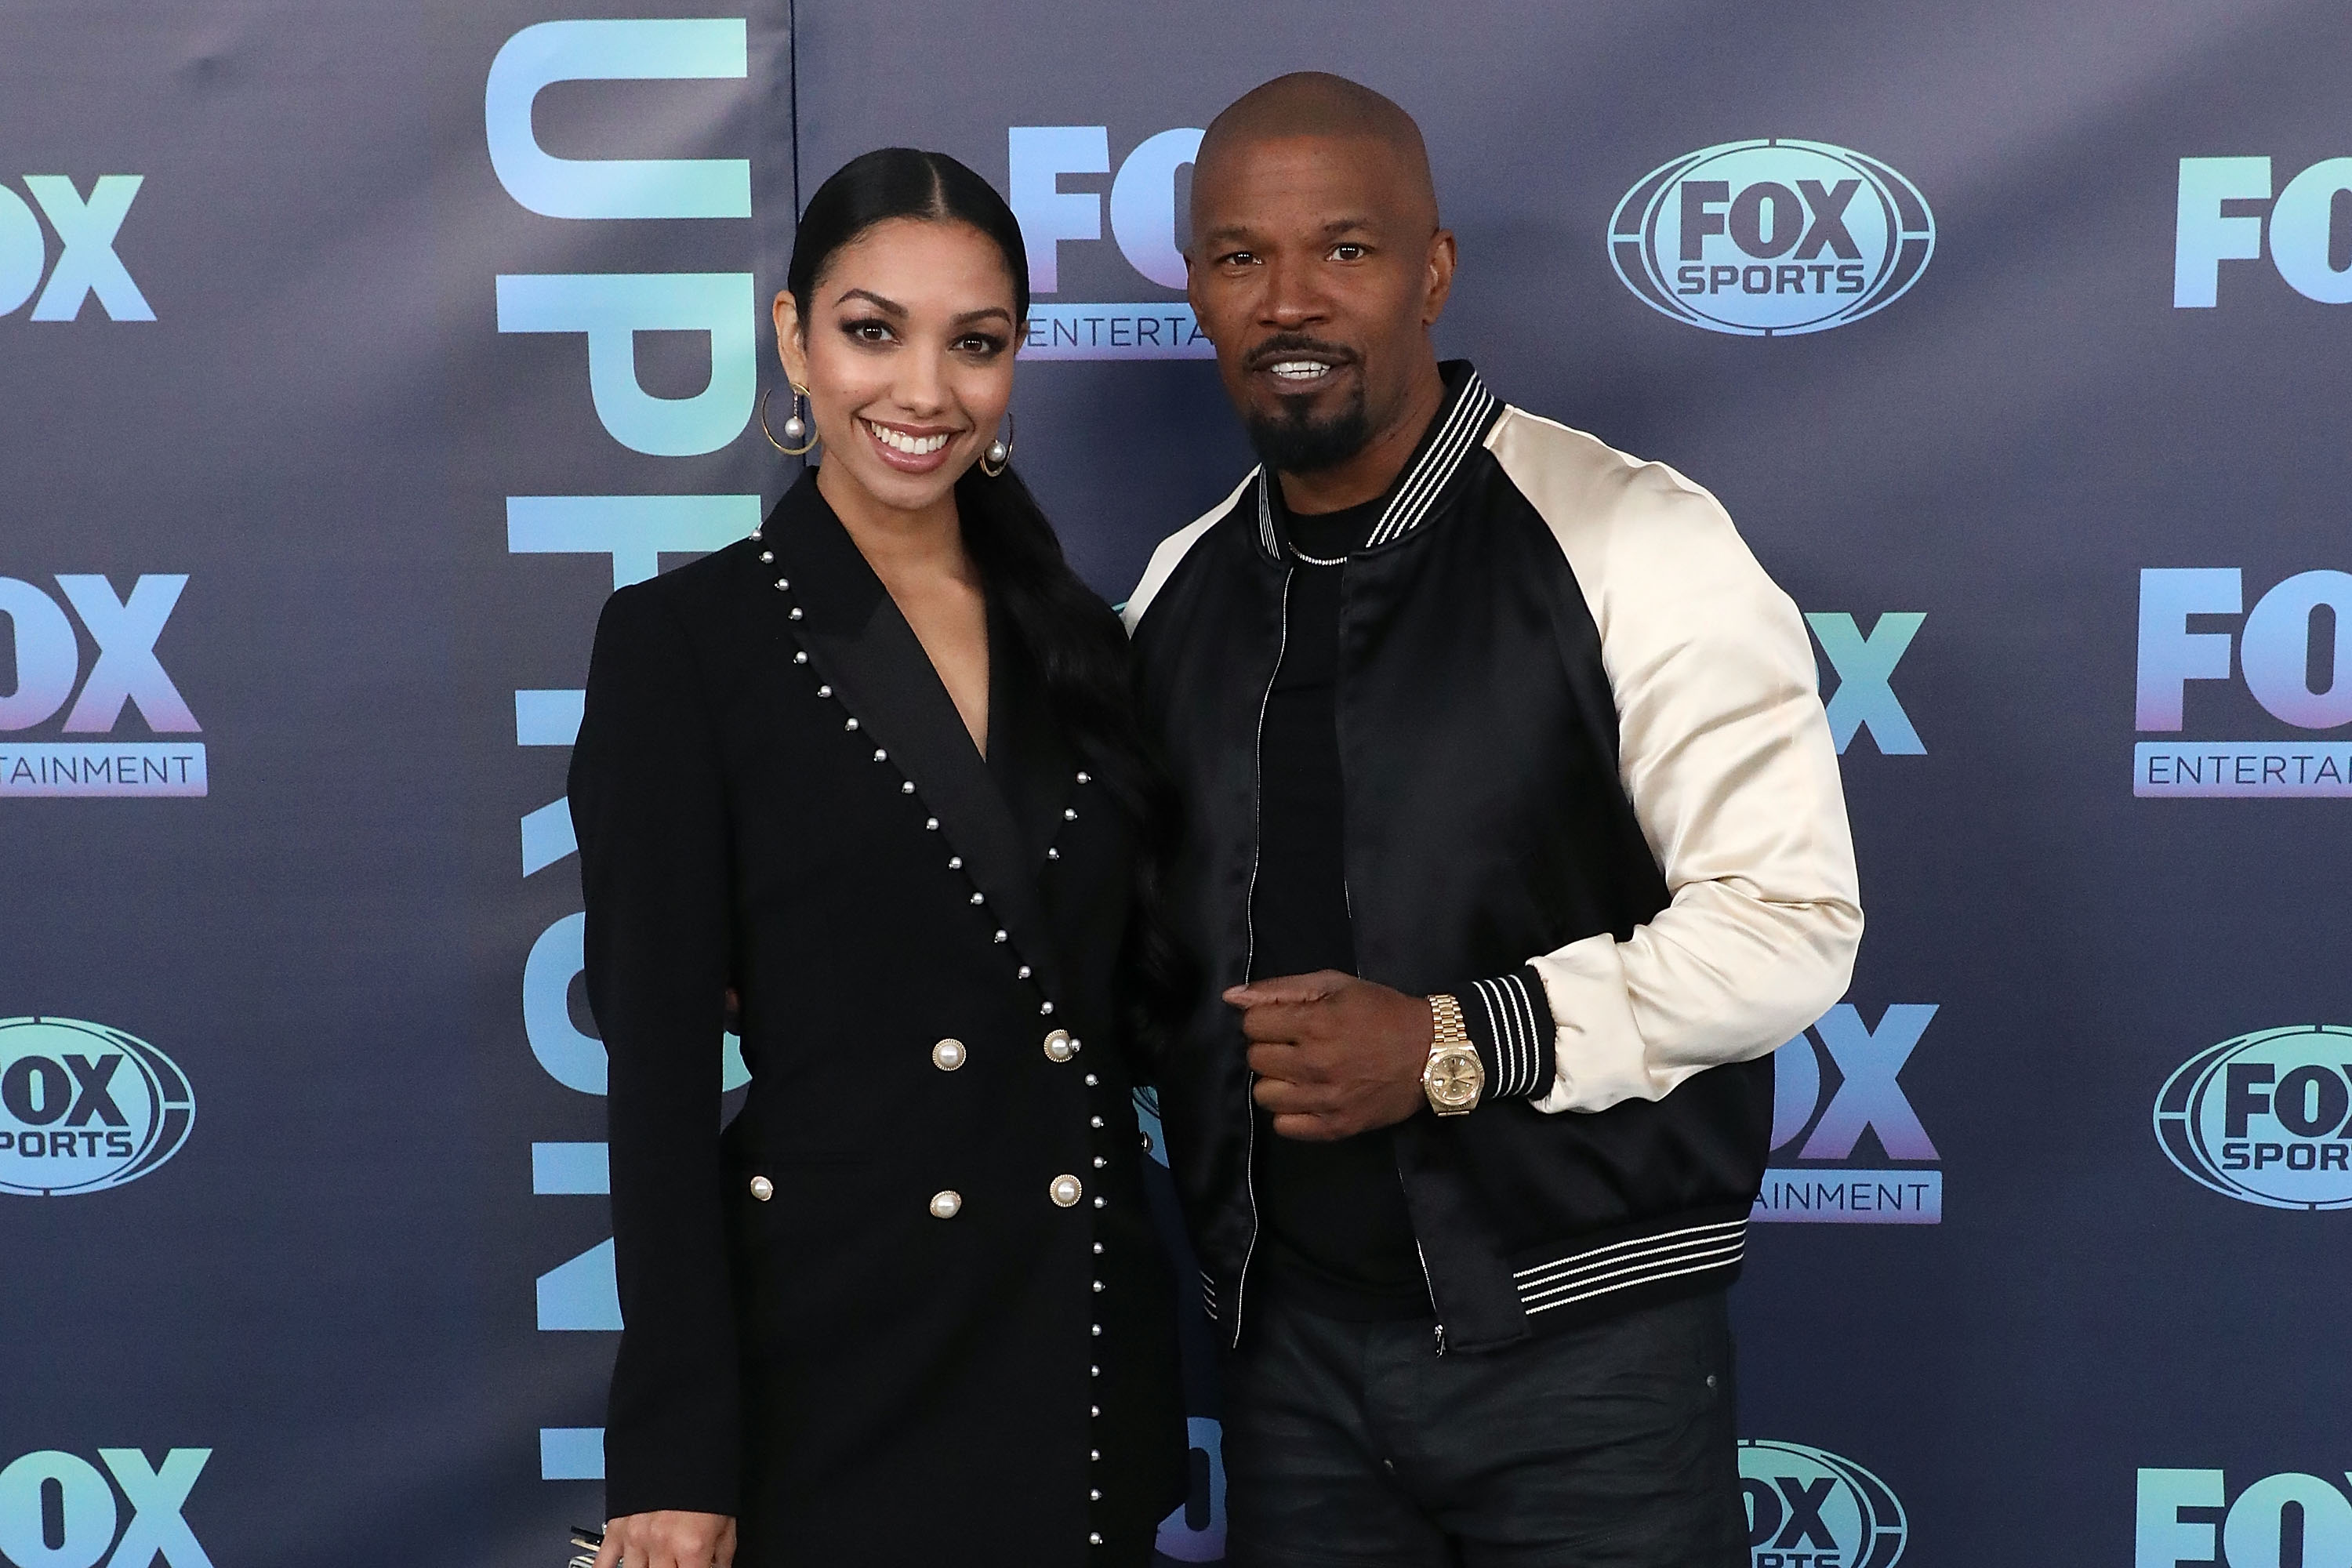 Corinne Foxx and Jamie Foxx attend the 2019 FOX Upfront at Wollman Rink in Central Park on May 13, 2019 in New York City | Source: Getty Images